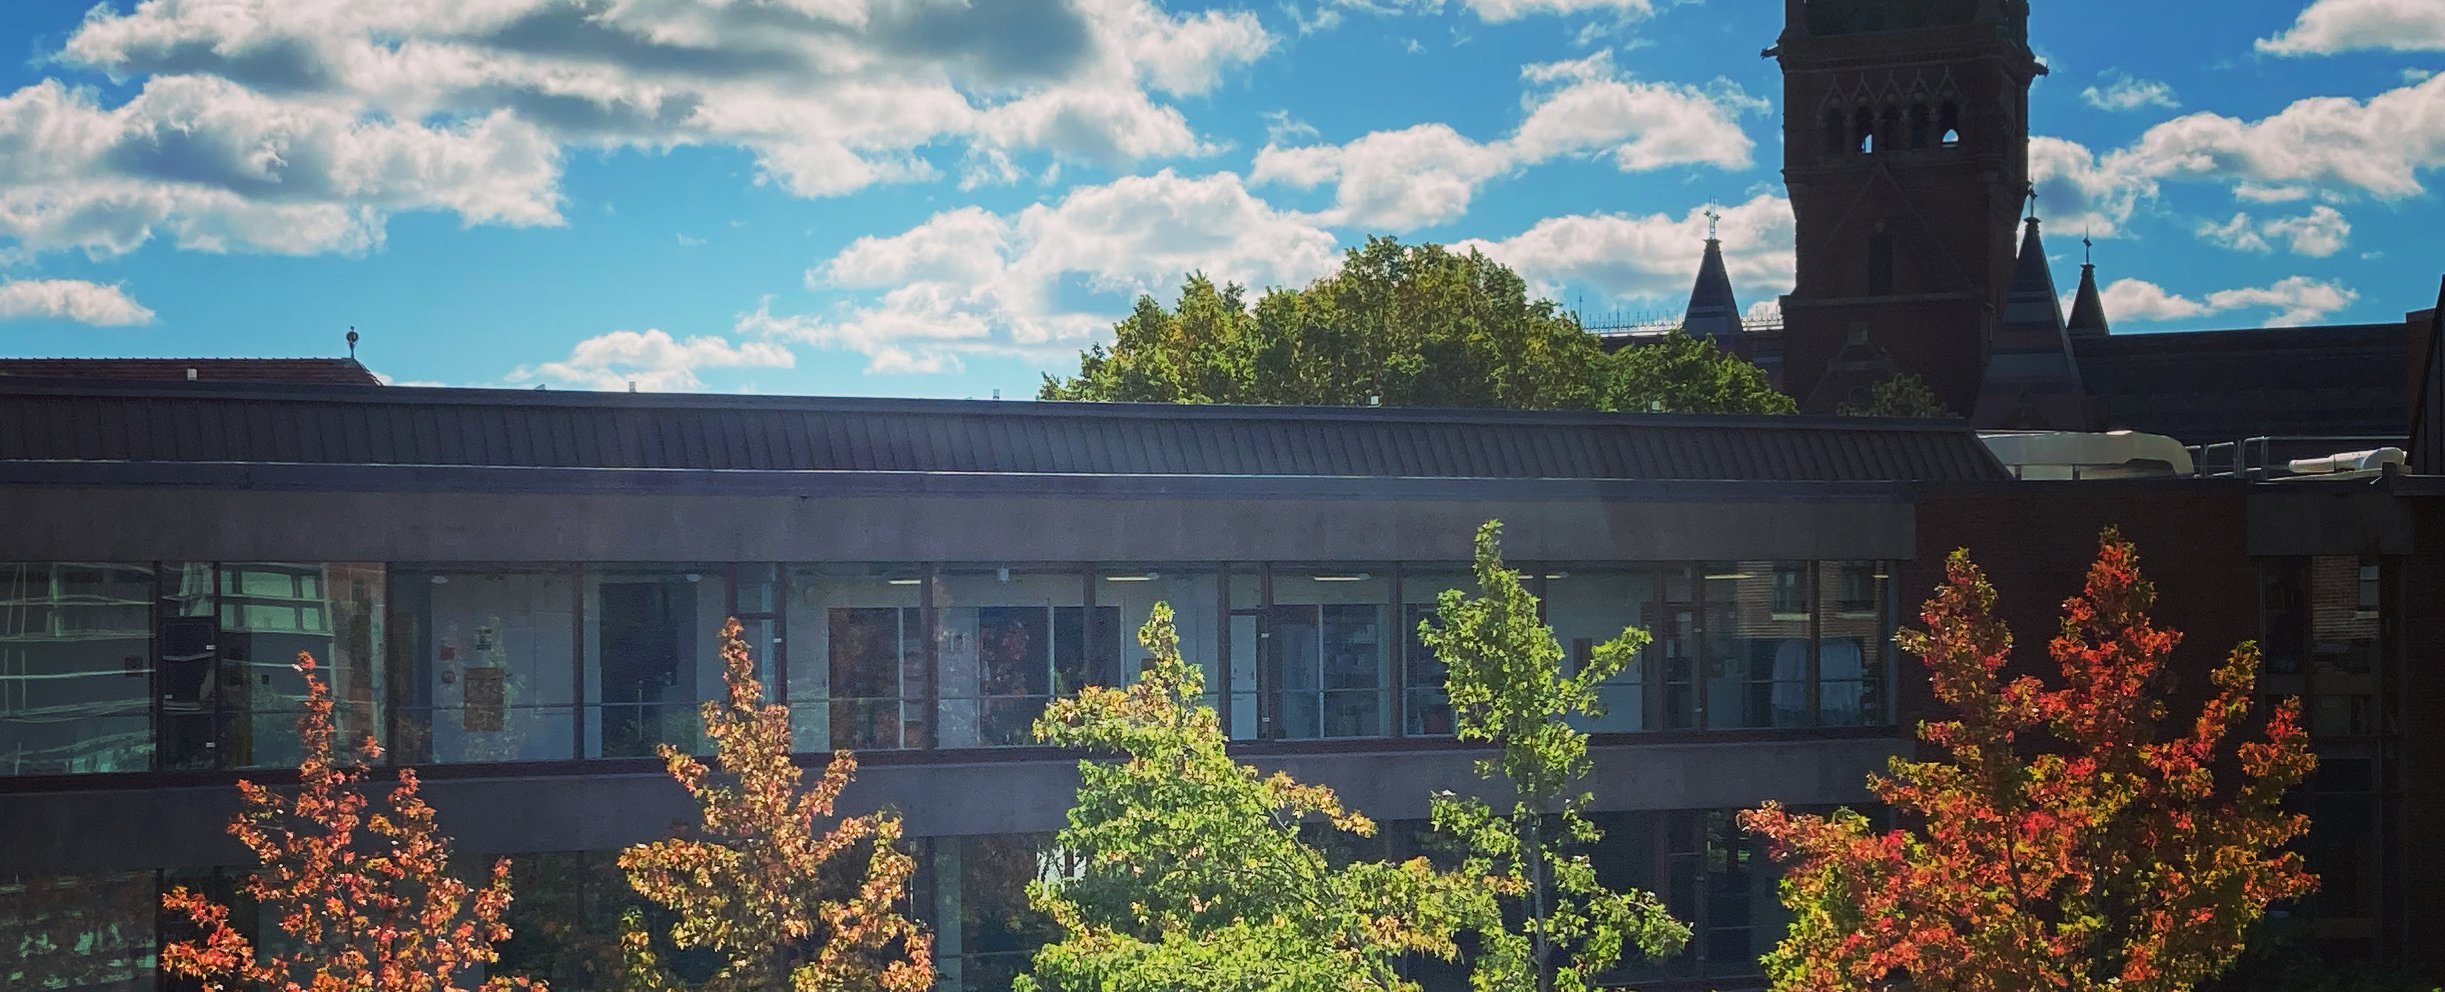 View of Sherman Fairchild lab with trees in the foreground and a partly cloudy sky in the background